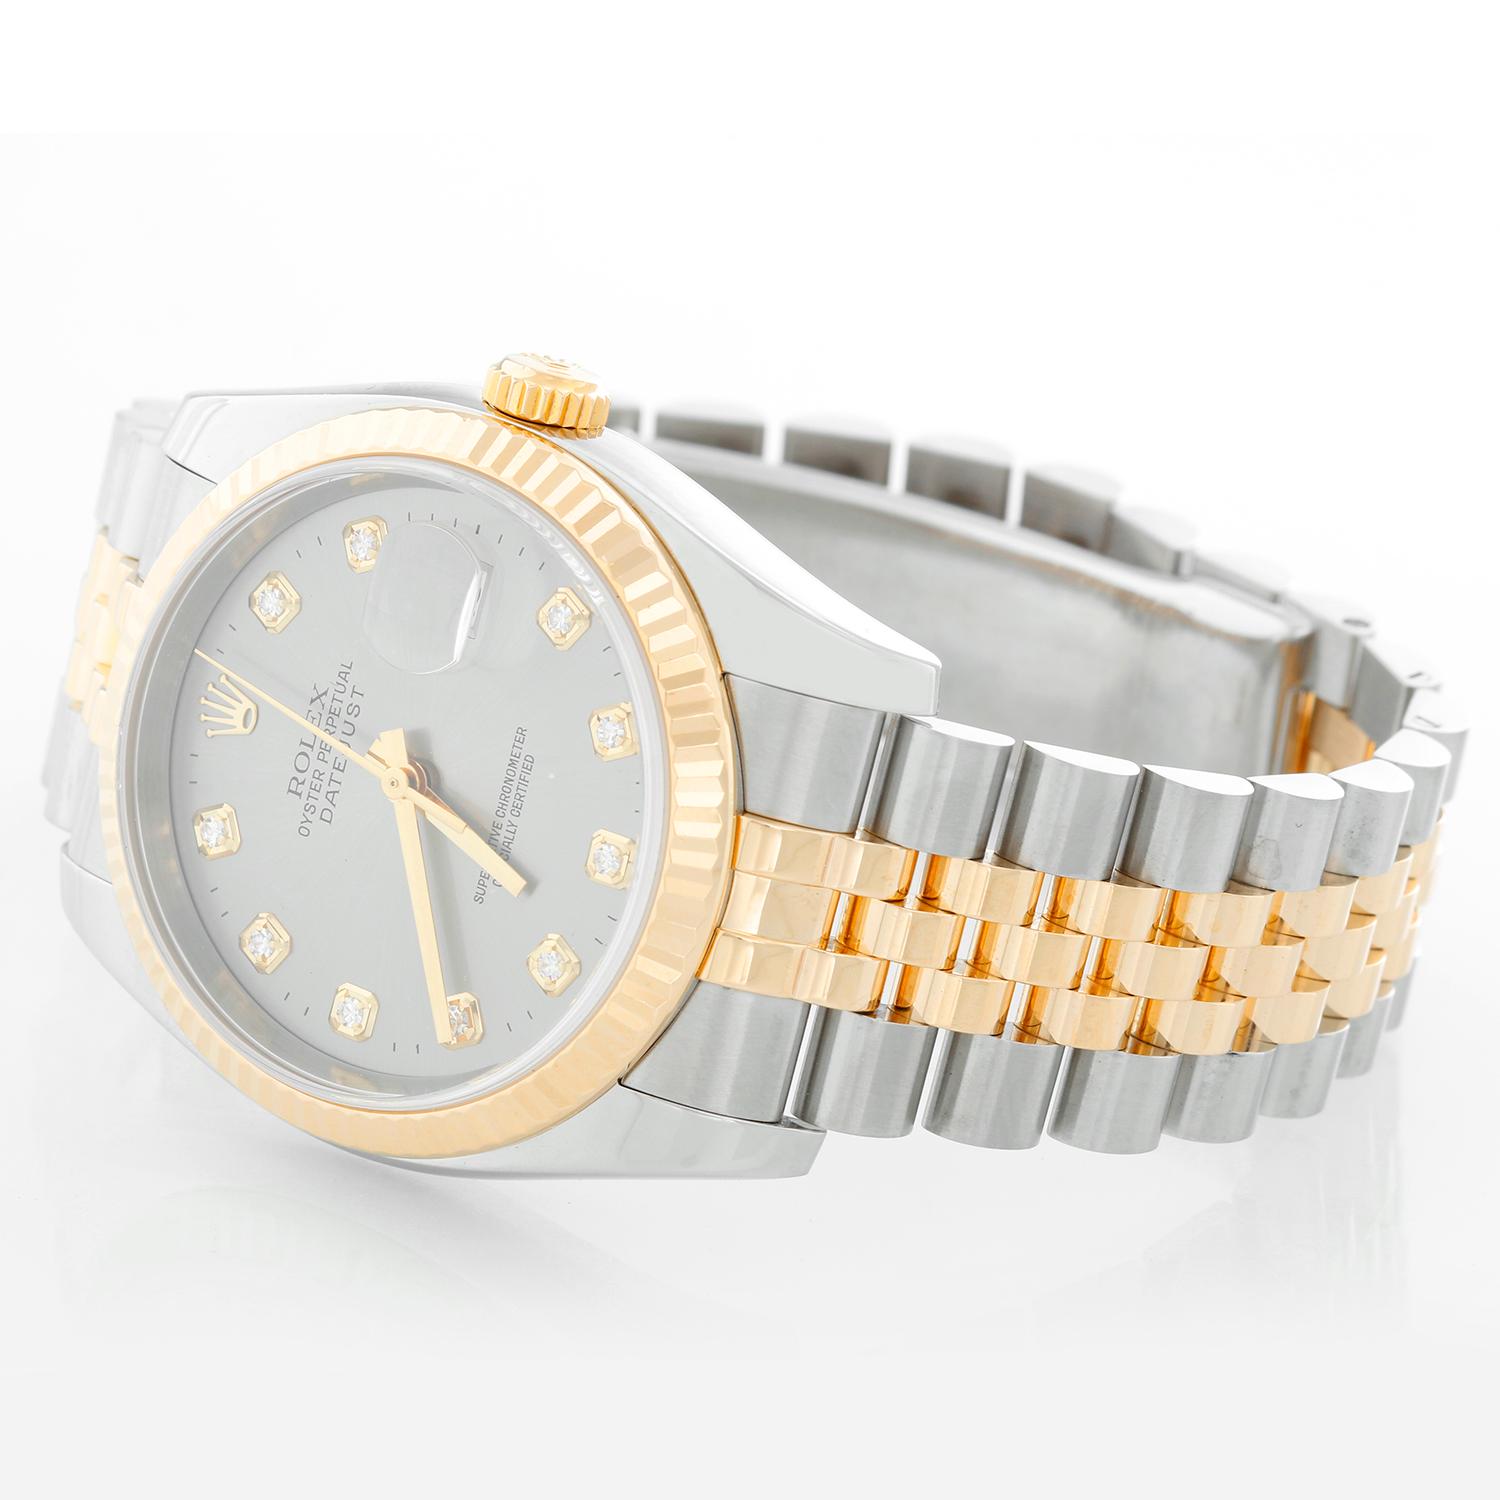 Rolex Datejust Men's 2-Tone Factory Diamond Dial  Watch 116233 - Automatic winding, 31 jewels, Quickset, sapphire crystal. Stainless steel case with 18k yellow gold fluted bezel (36mm diameter). Factory Grey diamond dial. Stainless steel and 18k